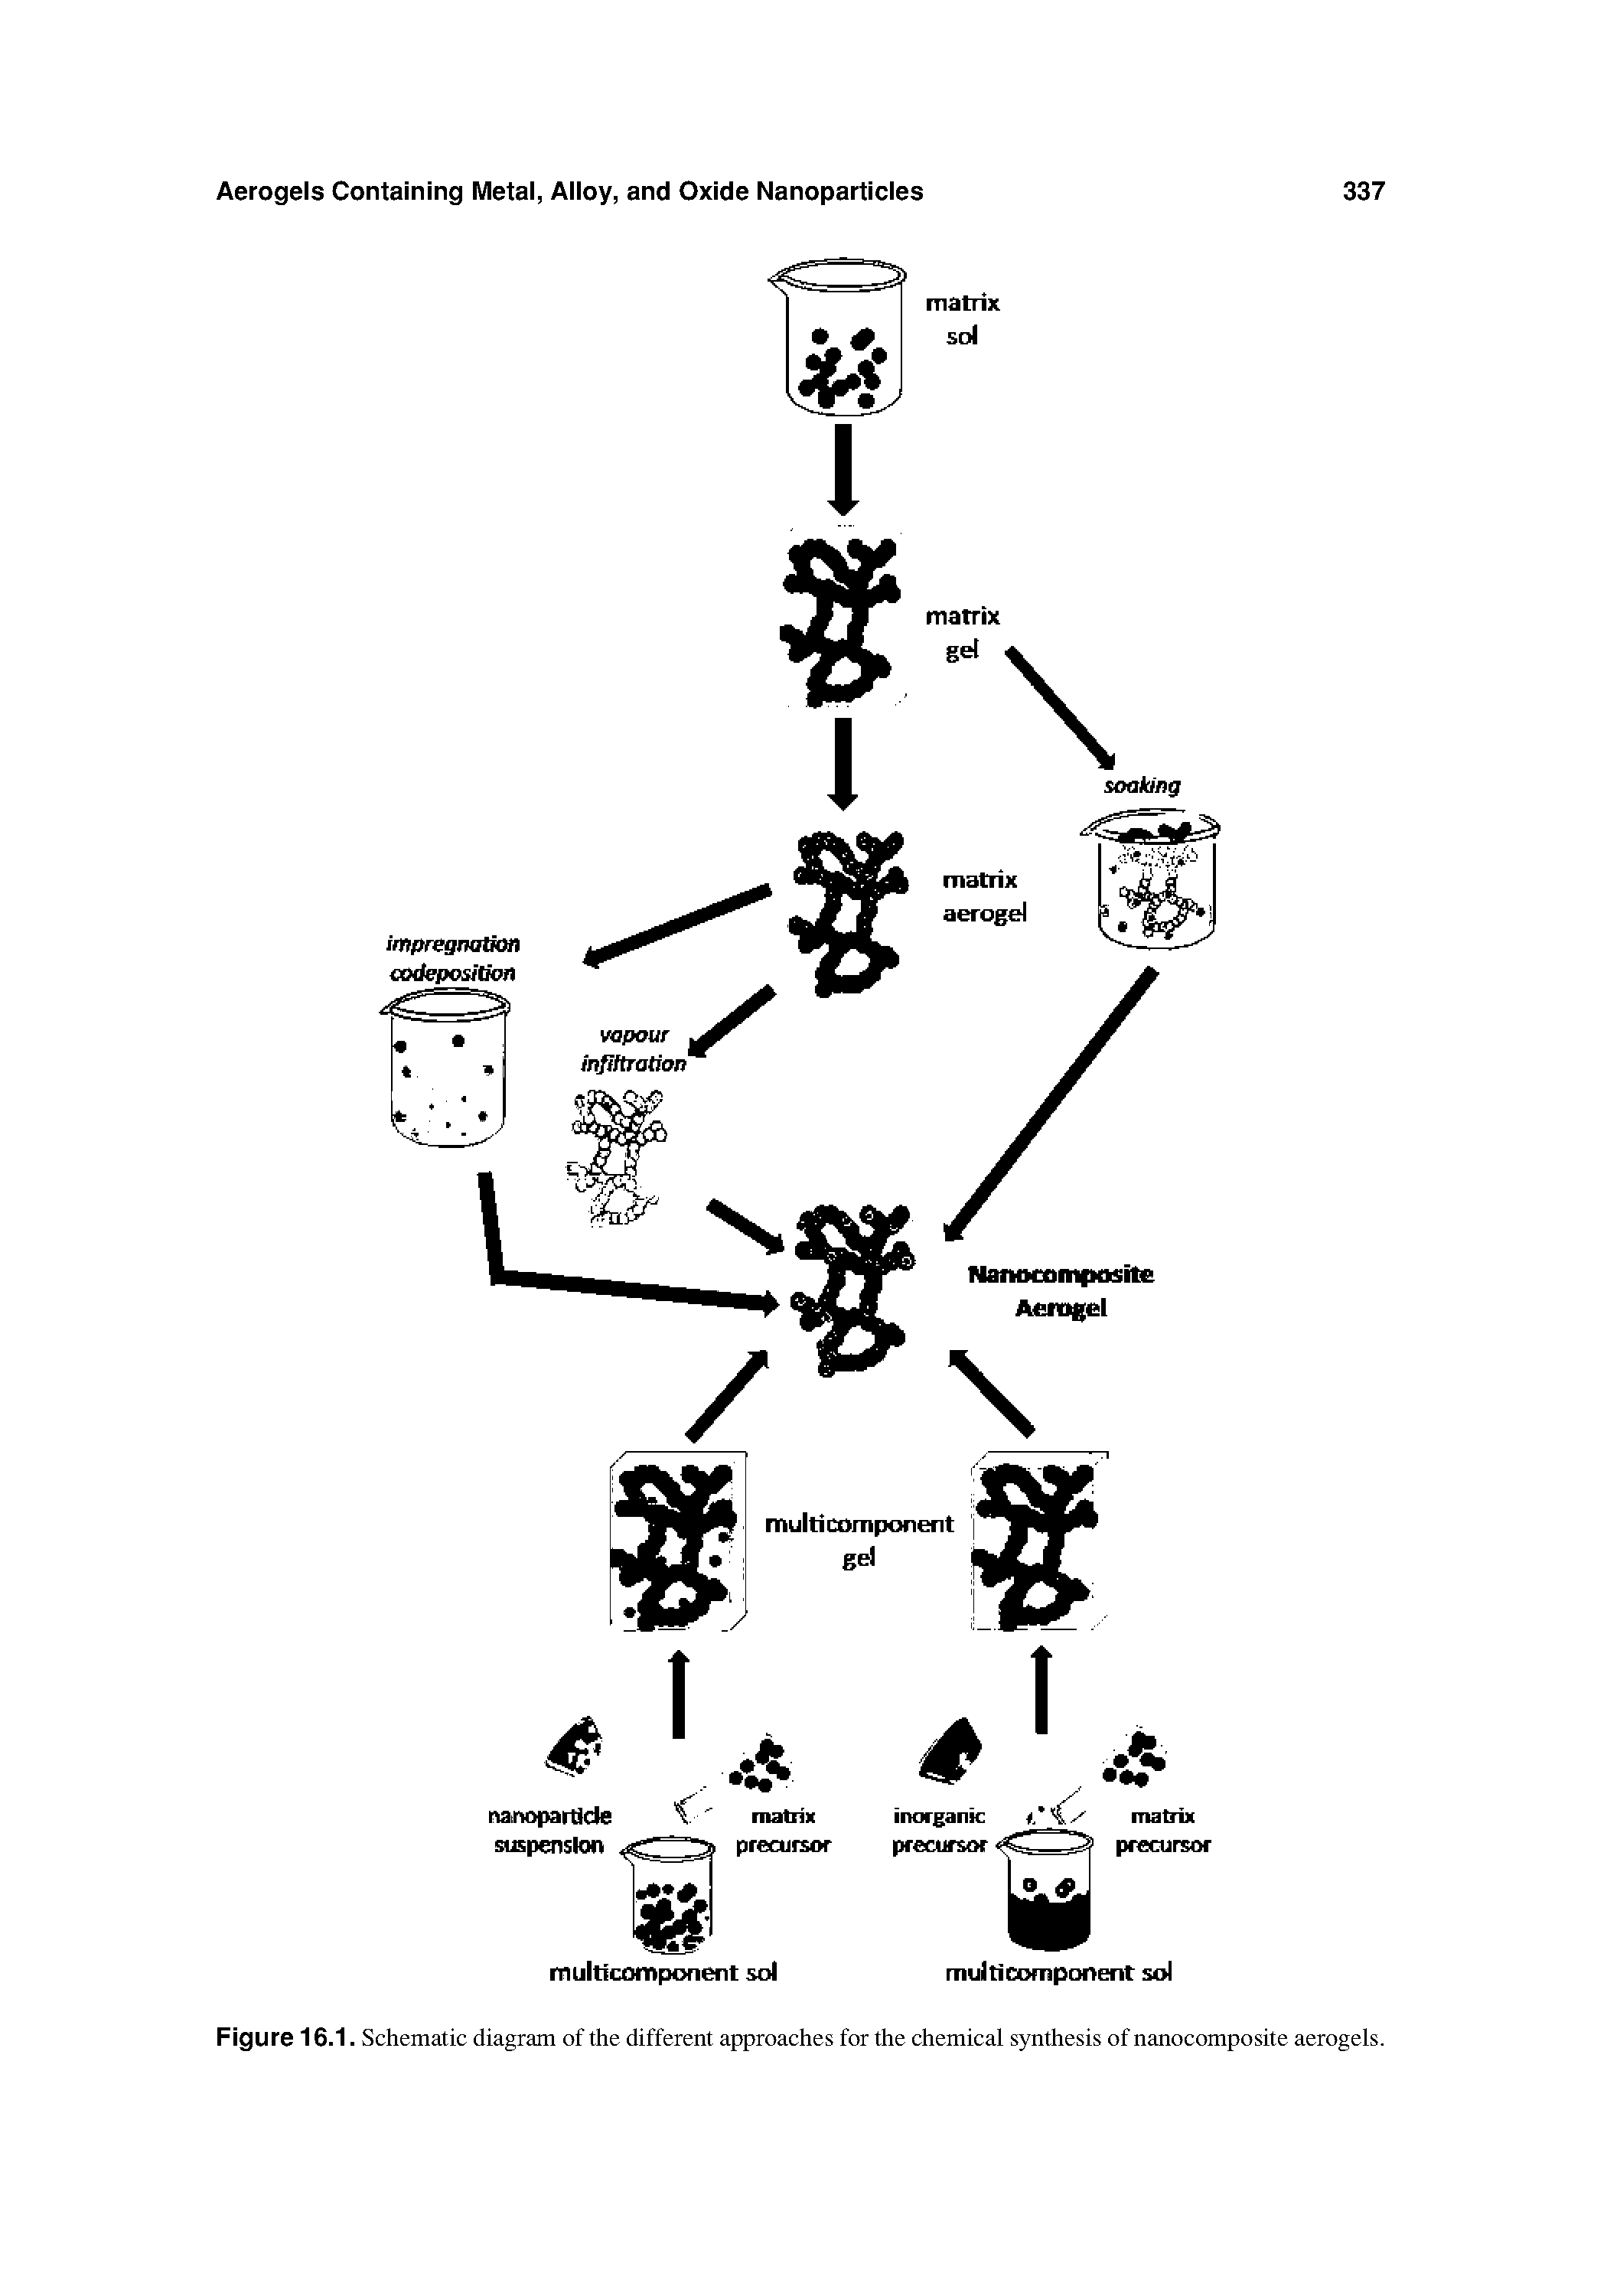 Figure 16.1. Schematic diagram of the different approaches for the chemical synthesis of nanocomposite aerogels.